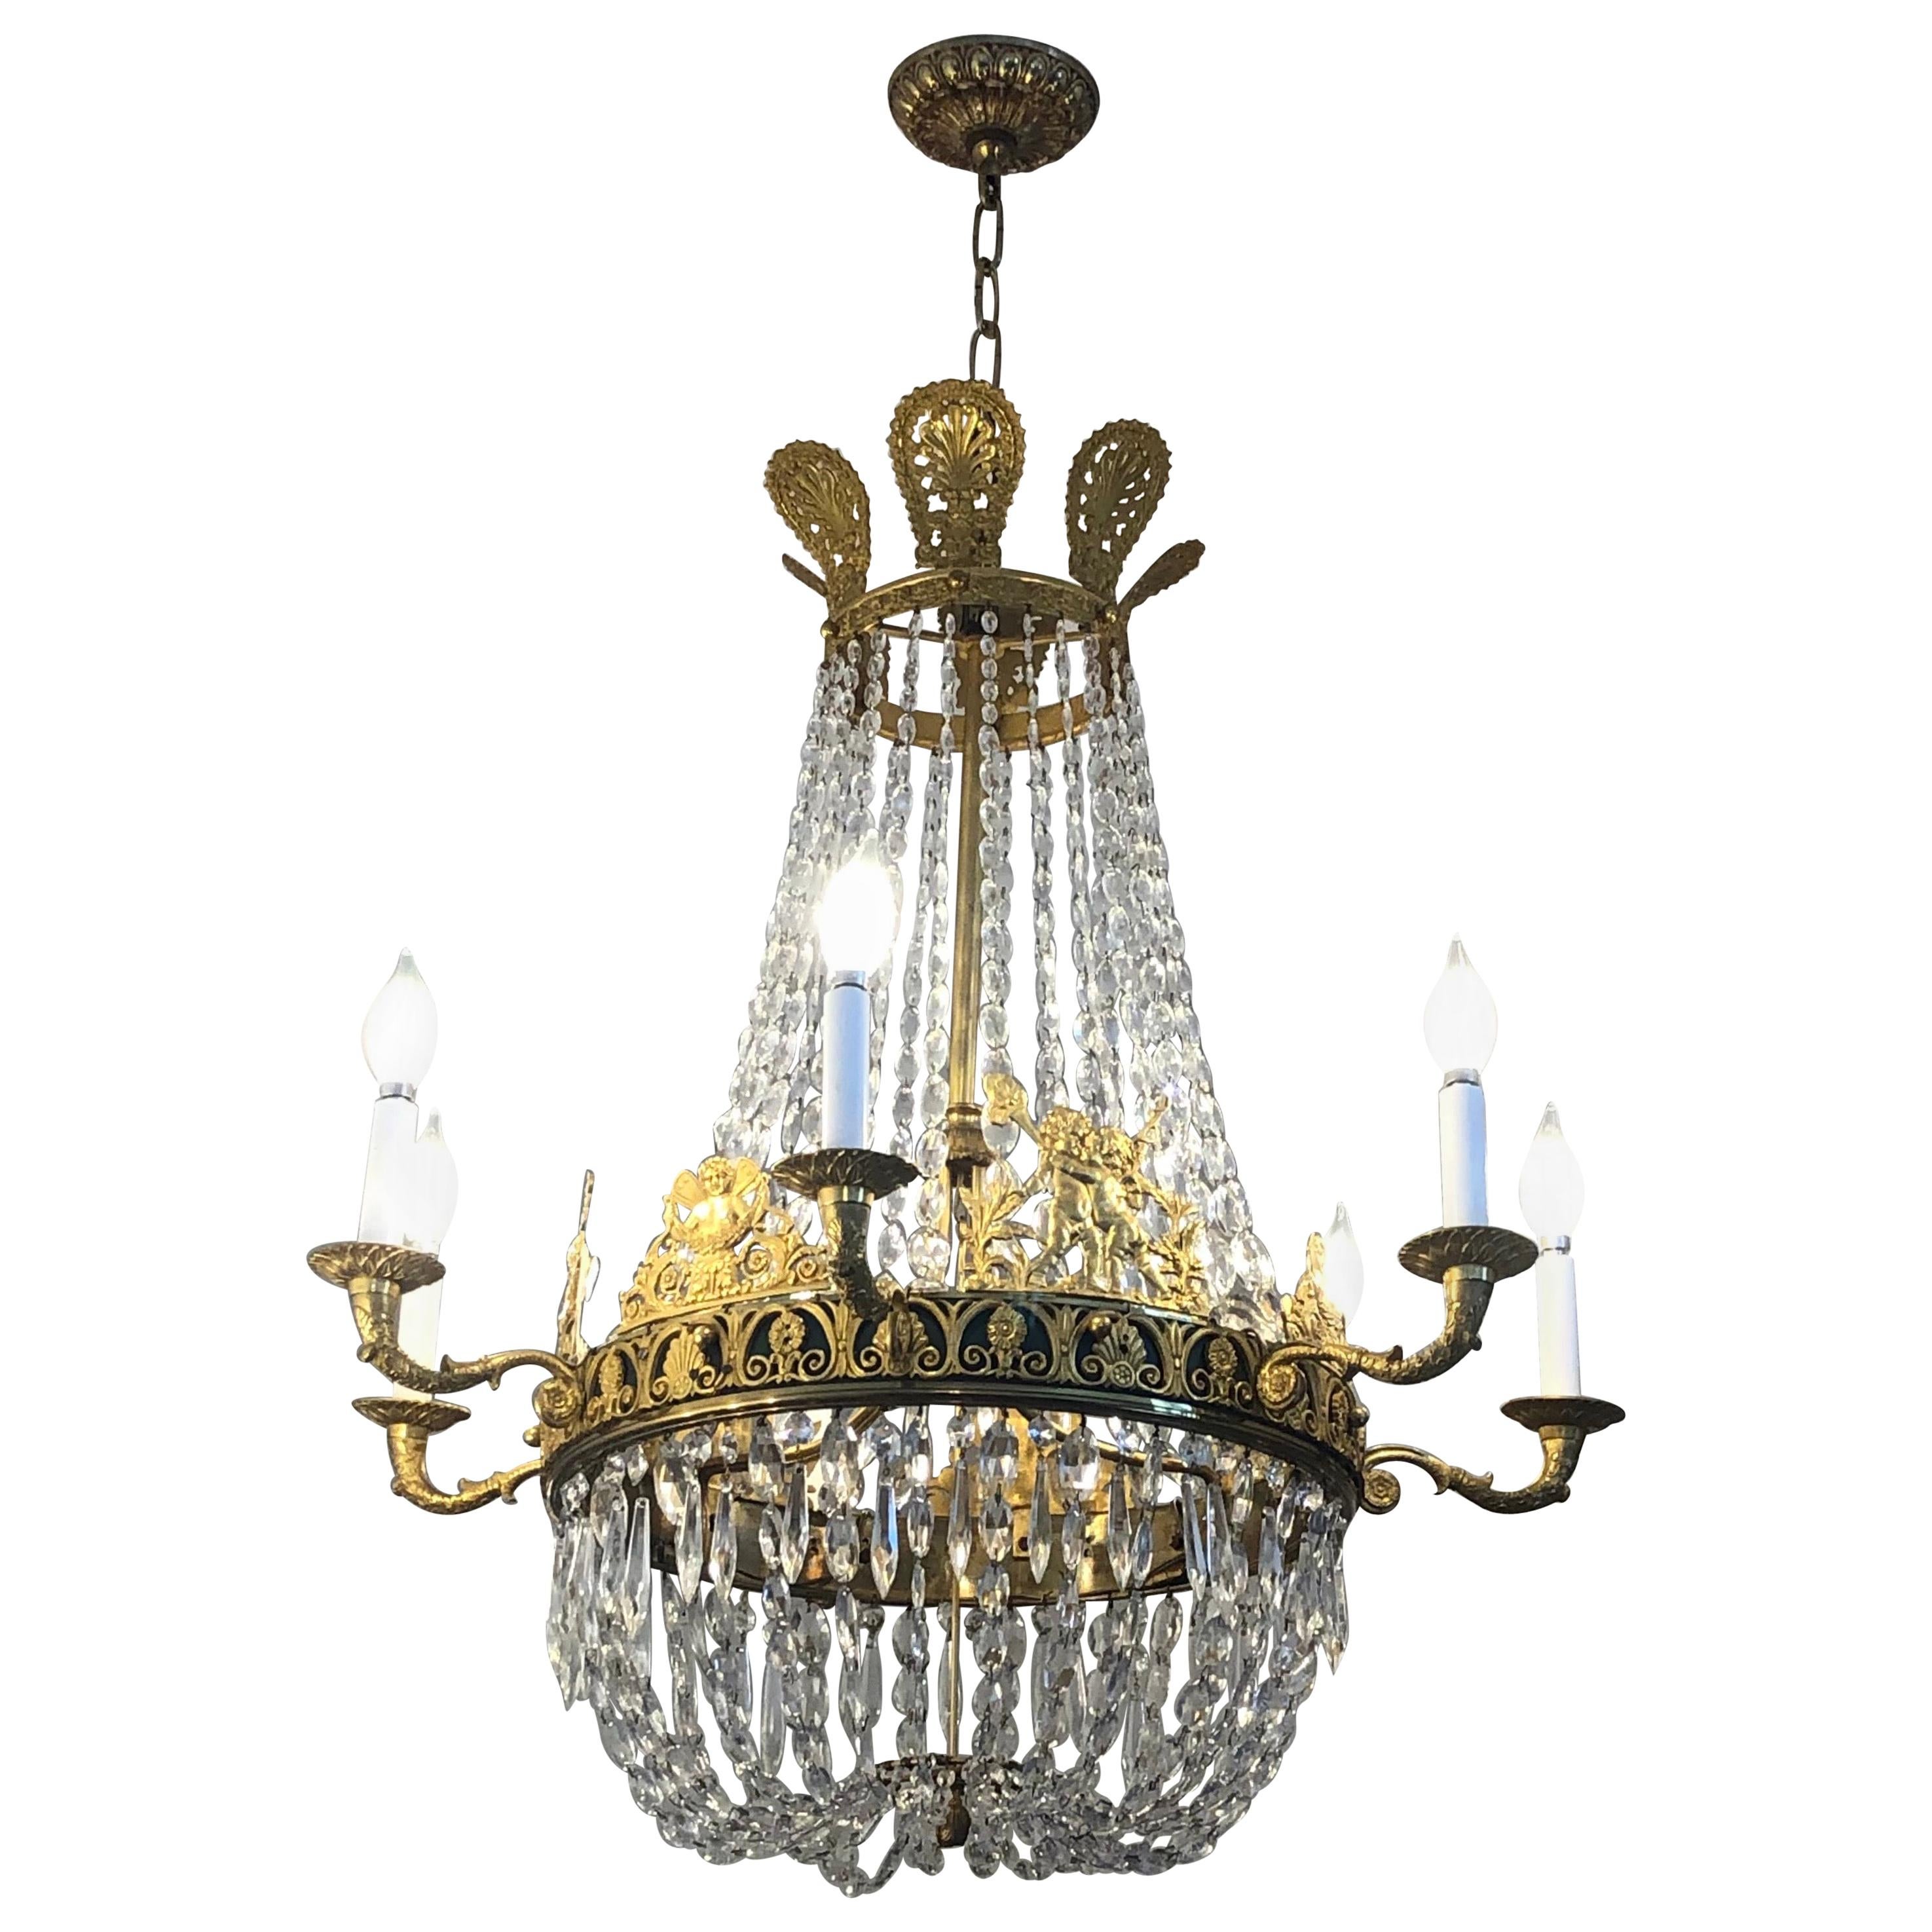 French Empire Ormolu and Crystal 7-Arm Chandelier, 19th Century